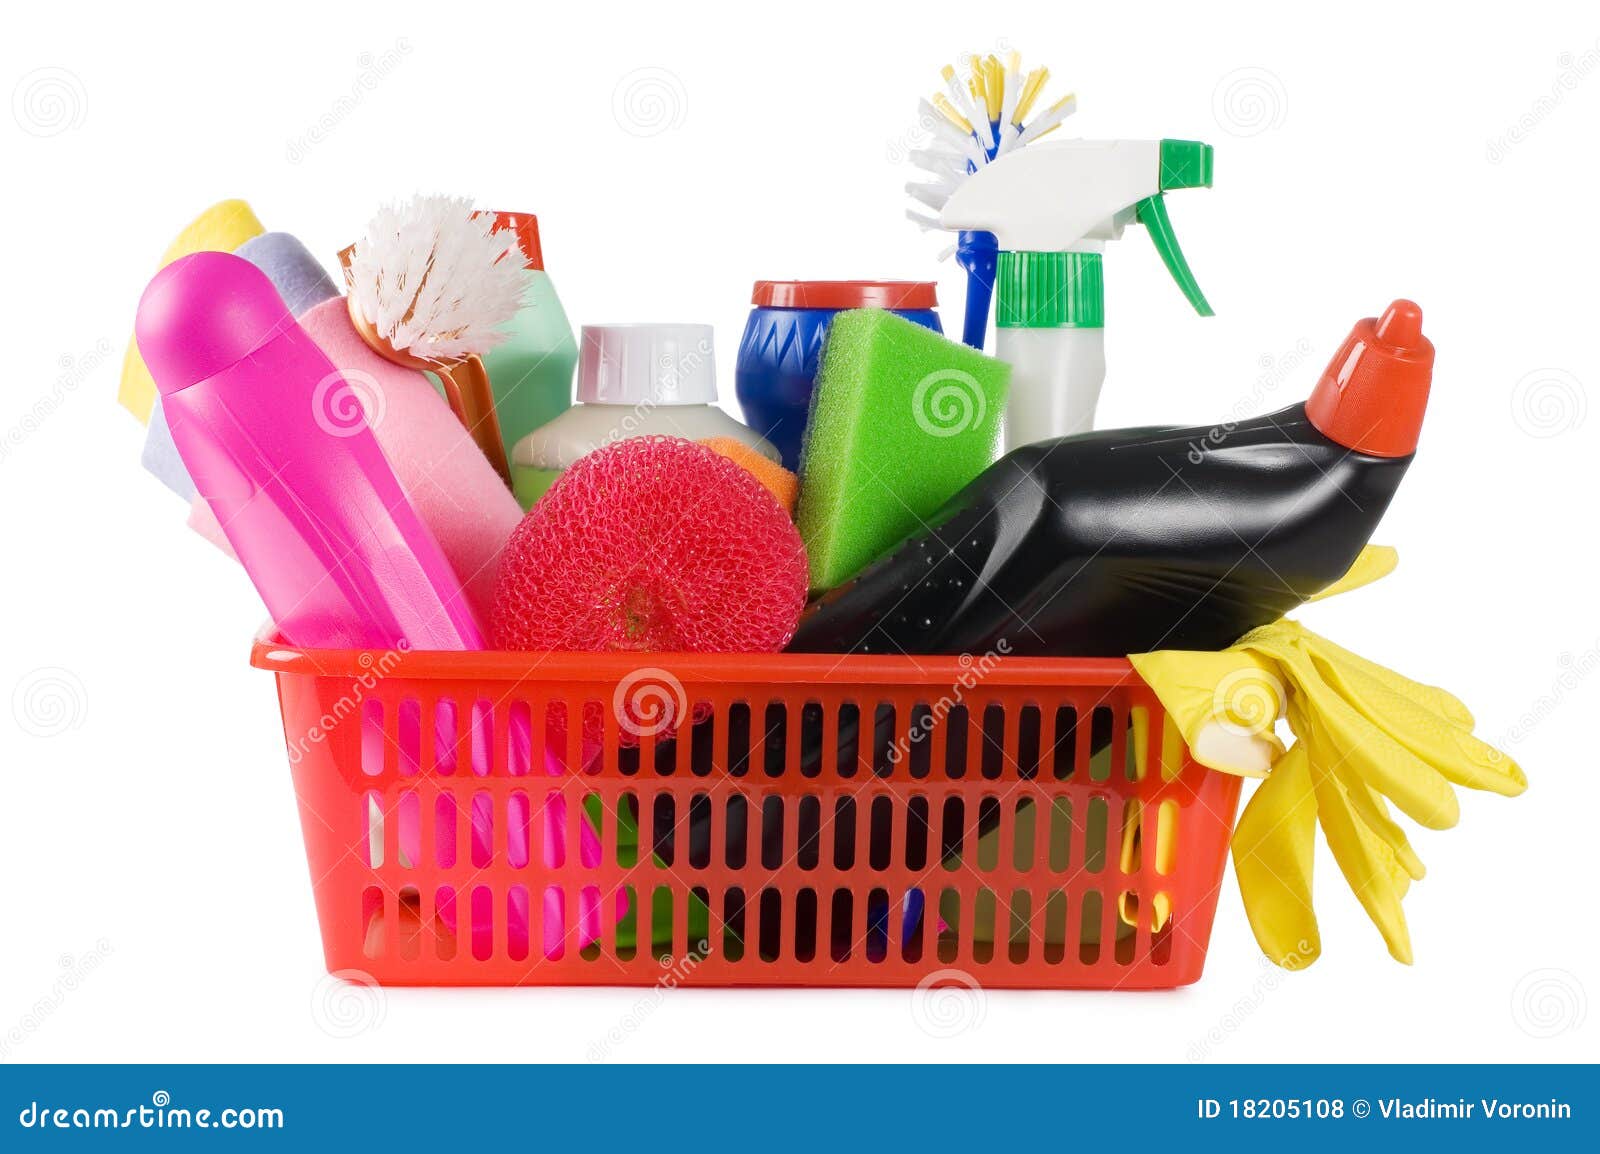 basket with means for cleaning